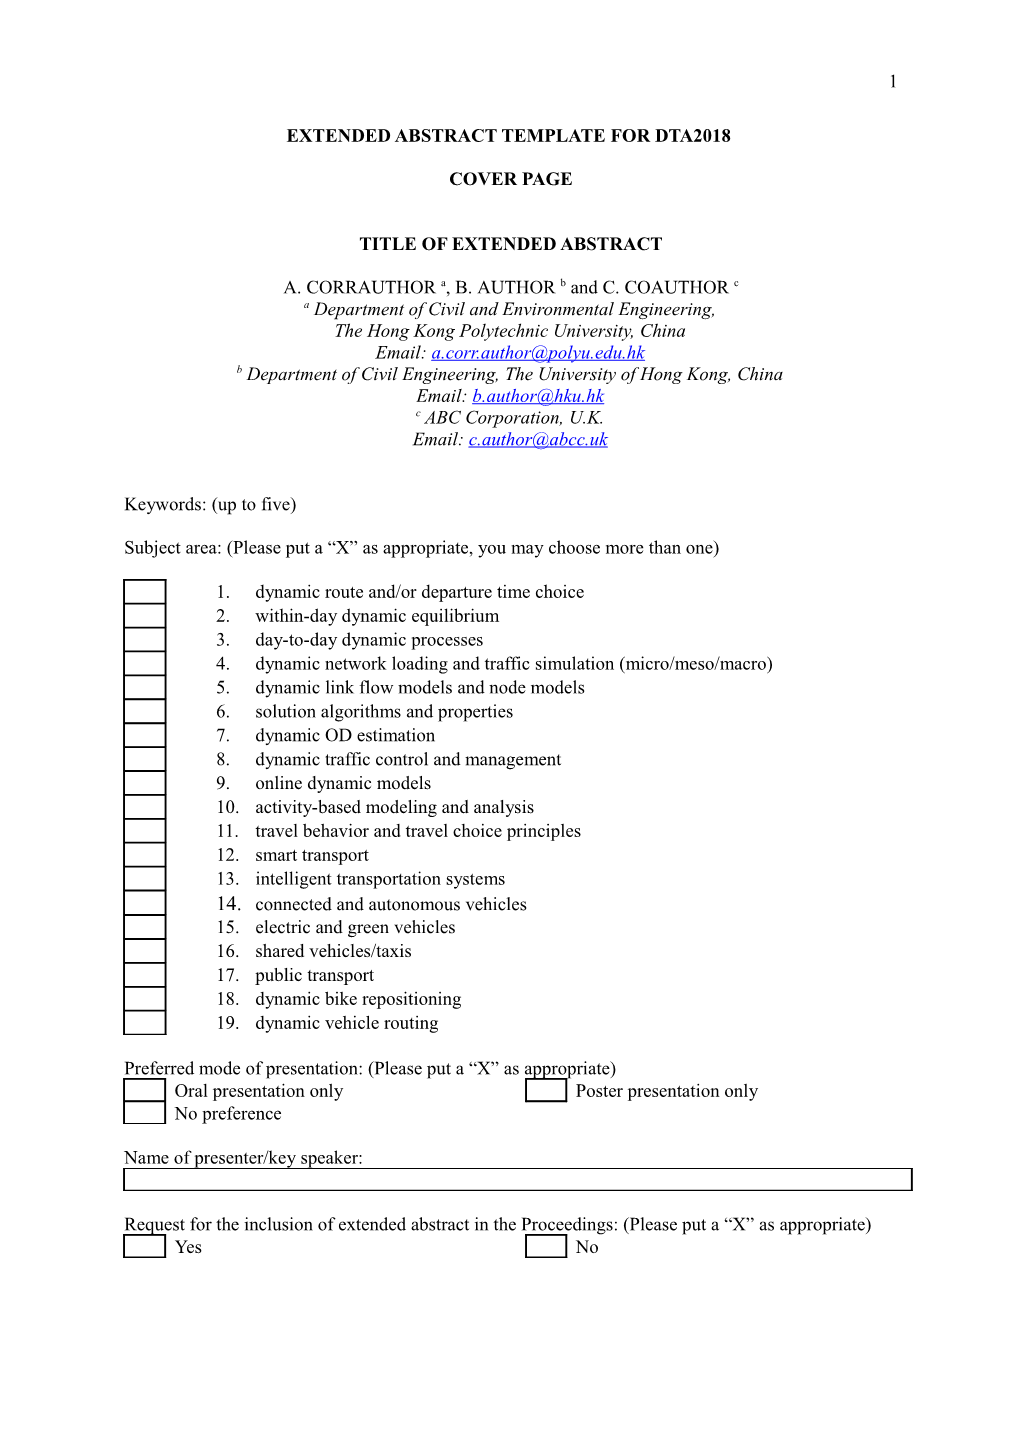 Manuscript Templates for Conference Proceedings